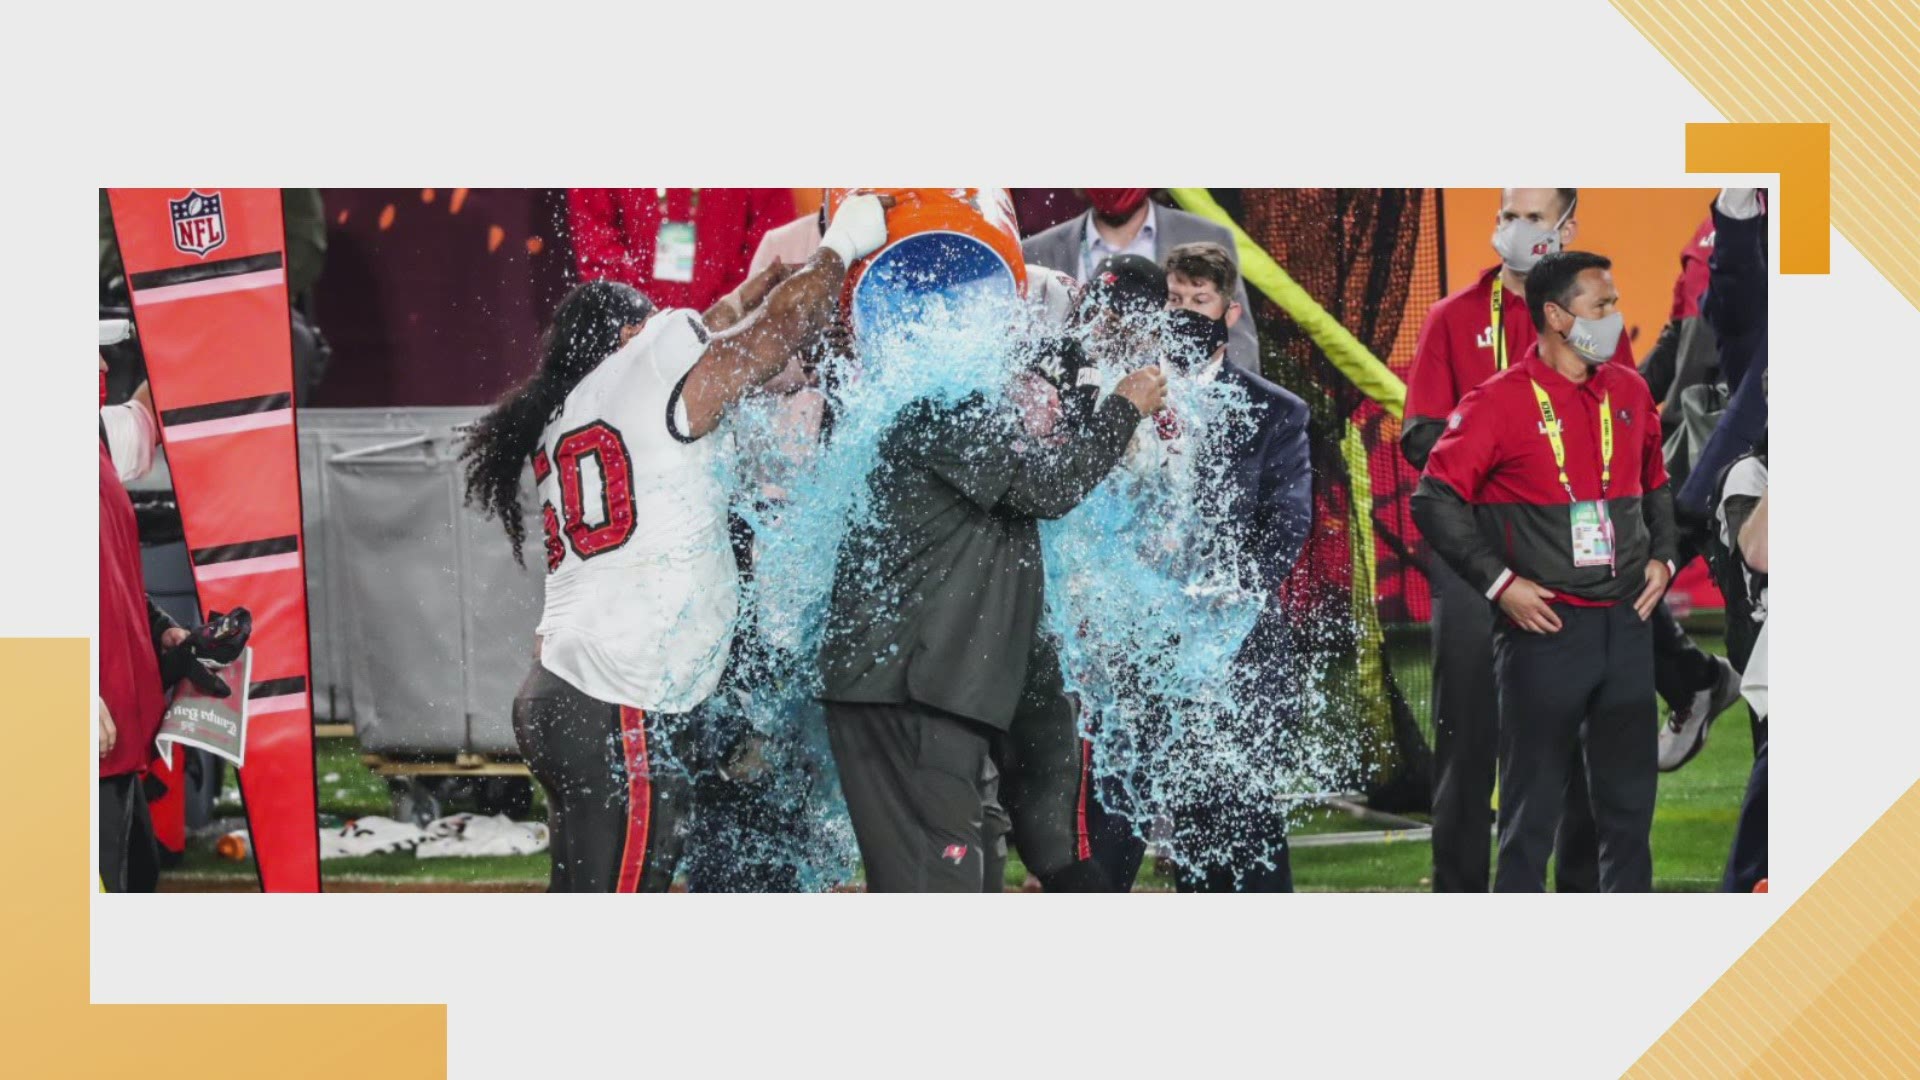 Also, did you know it's a common bet to predict what color Gatorade gets dumped?